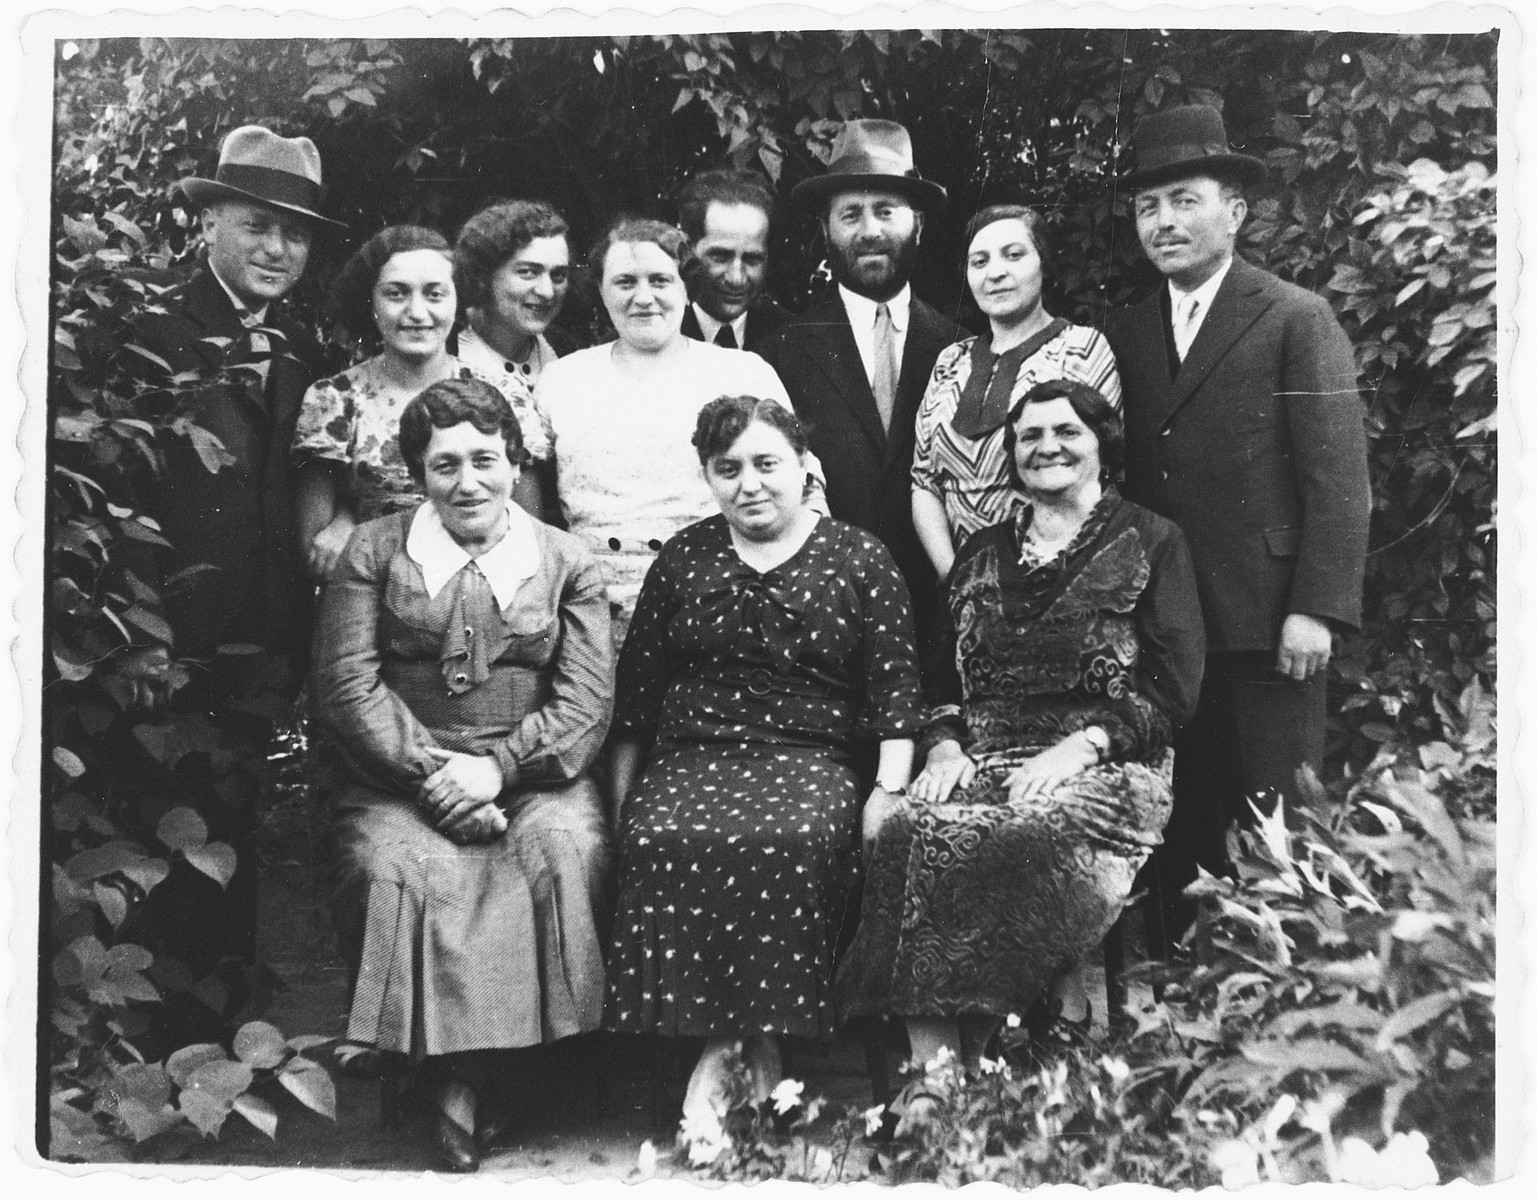 Group portrait of members of the extended Jam family in Rzeszow, Poland.

Among those pictured are Isaac and Ida (Jam) Friedberg (back row, center, Isaac is bareheaded and Ida is wearing a white blouse), and Dora, Regina, Efraim, Josef, and Memel Jam.